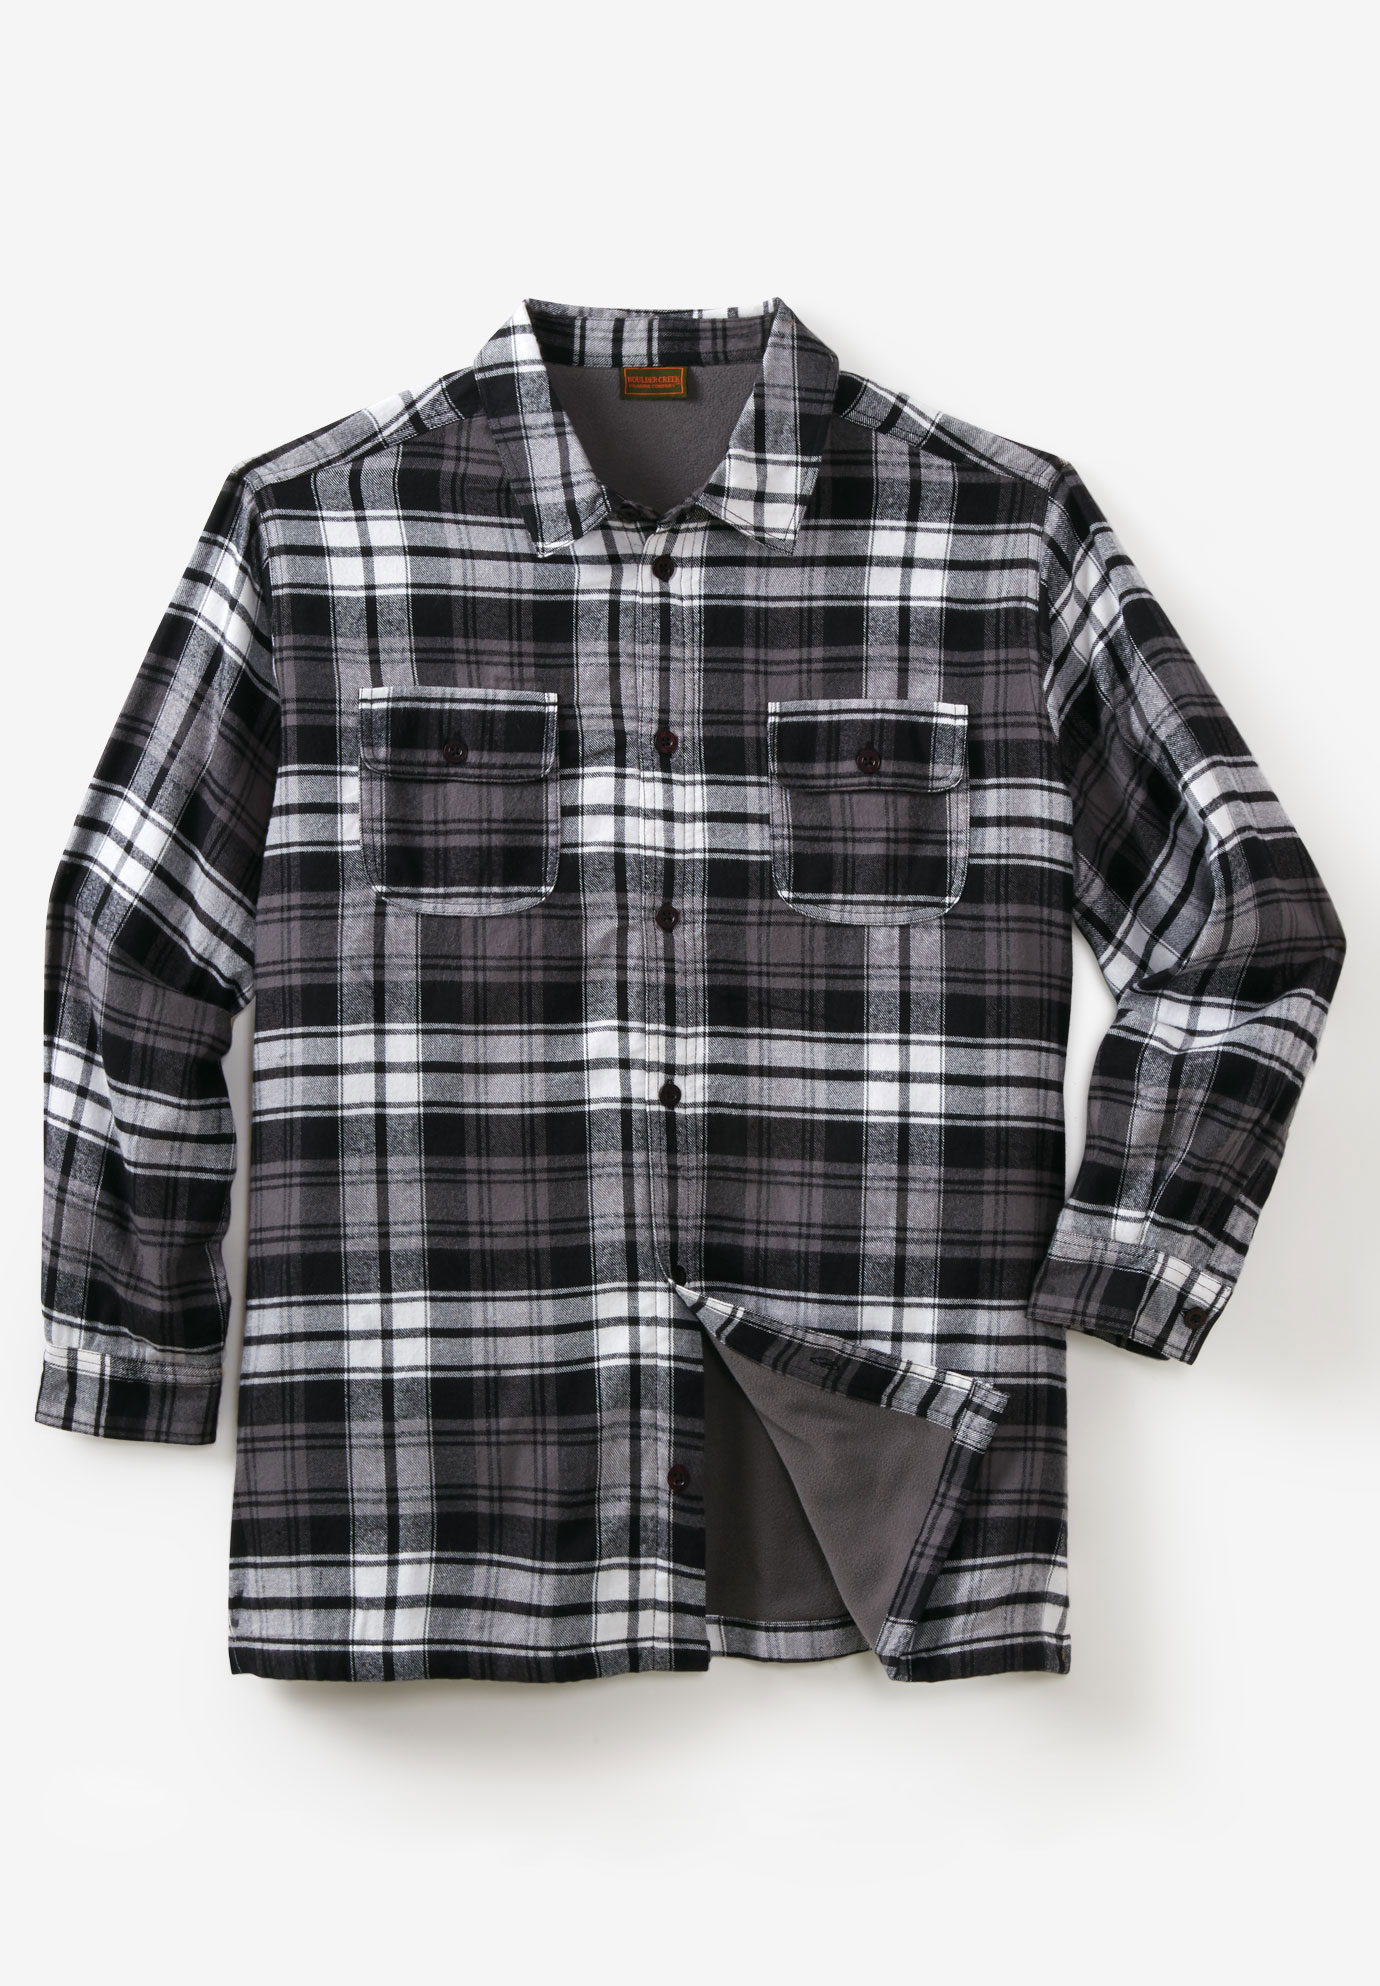 Fleece-Lined Flannel Shirt Jacket by Boulder Creek®| Big and Tall ...